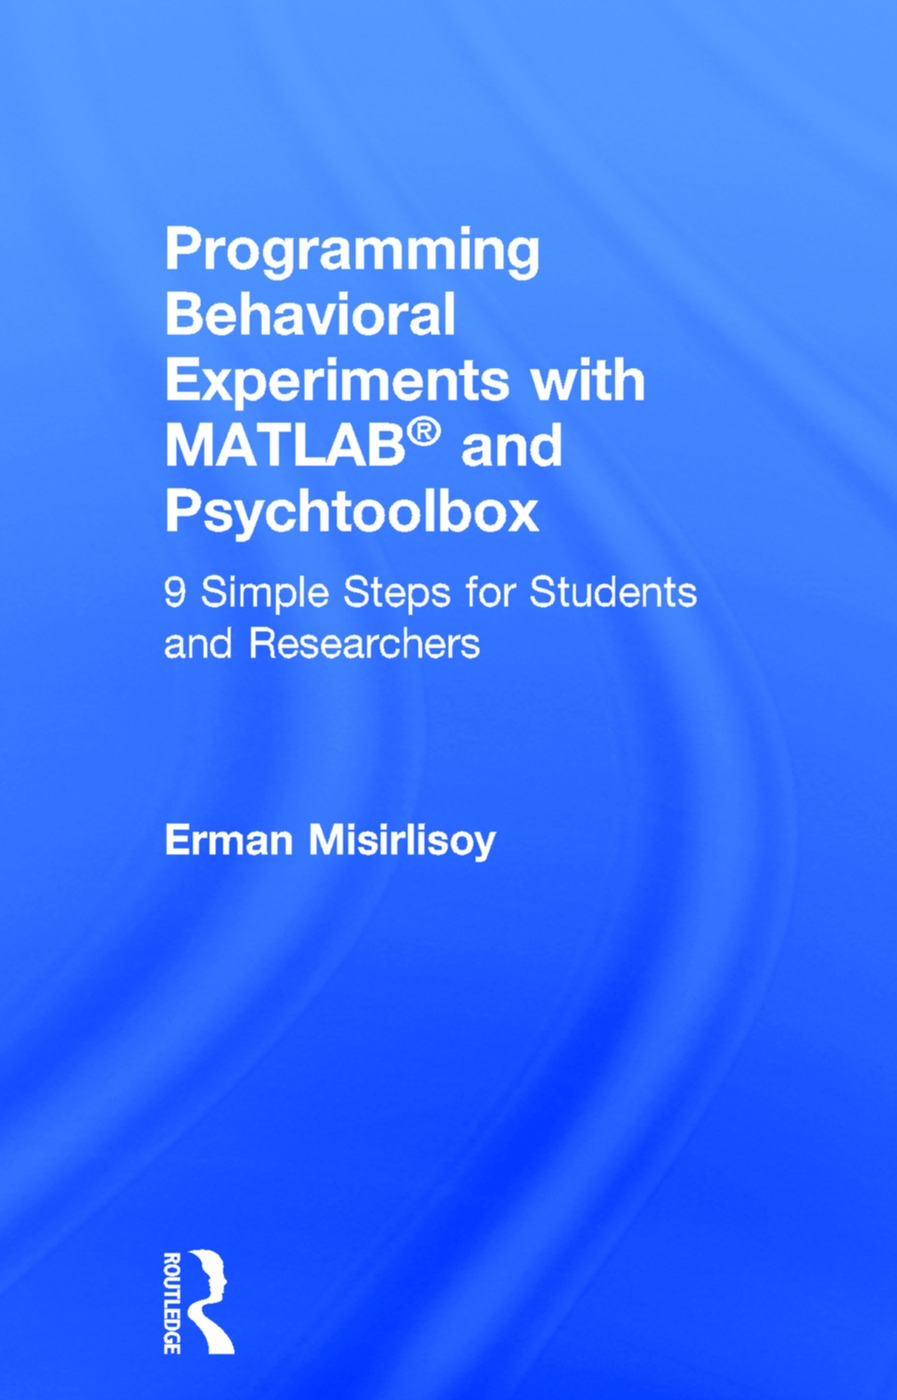 Programming Behavioral Experiments with MATLAB and Psychtoolbox: 9 Simple Steps for Students and Researchers